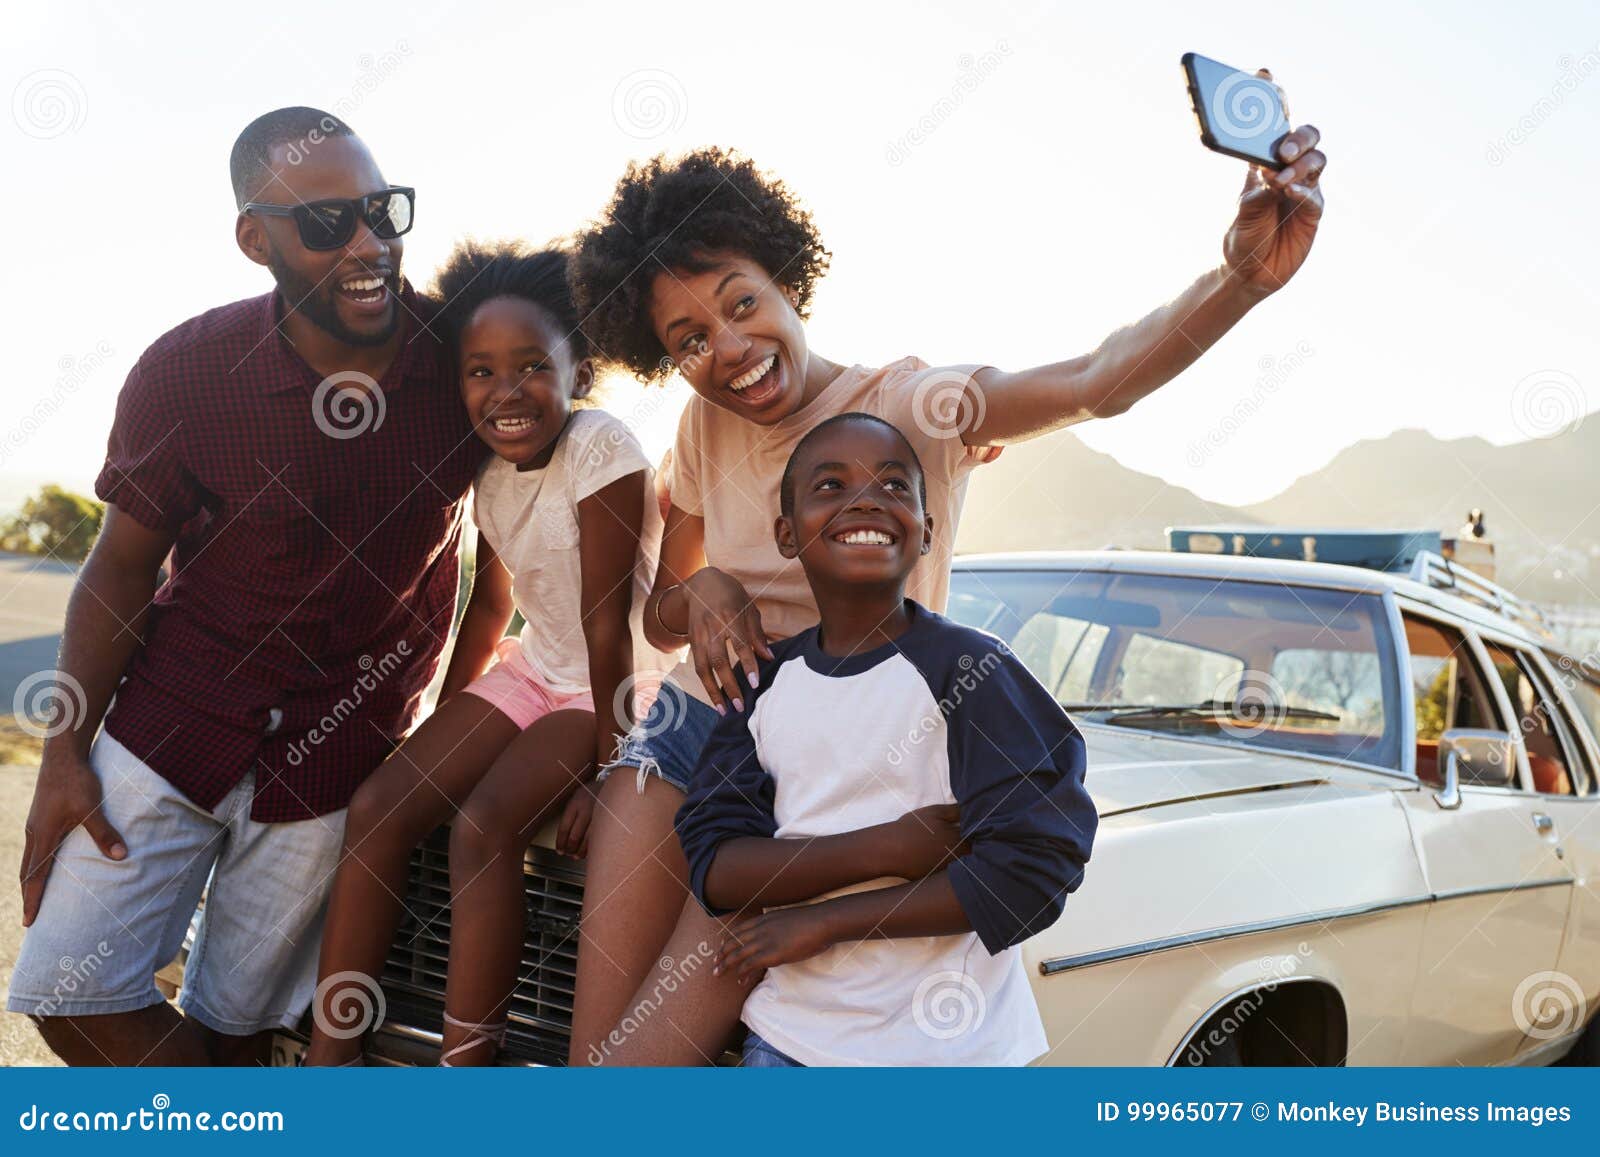 family posing for selfie next to car packed for road trip